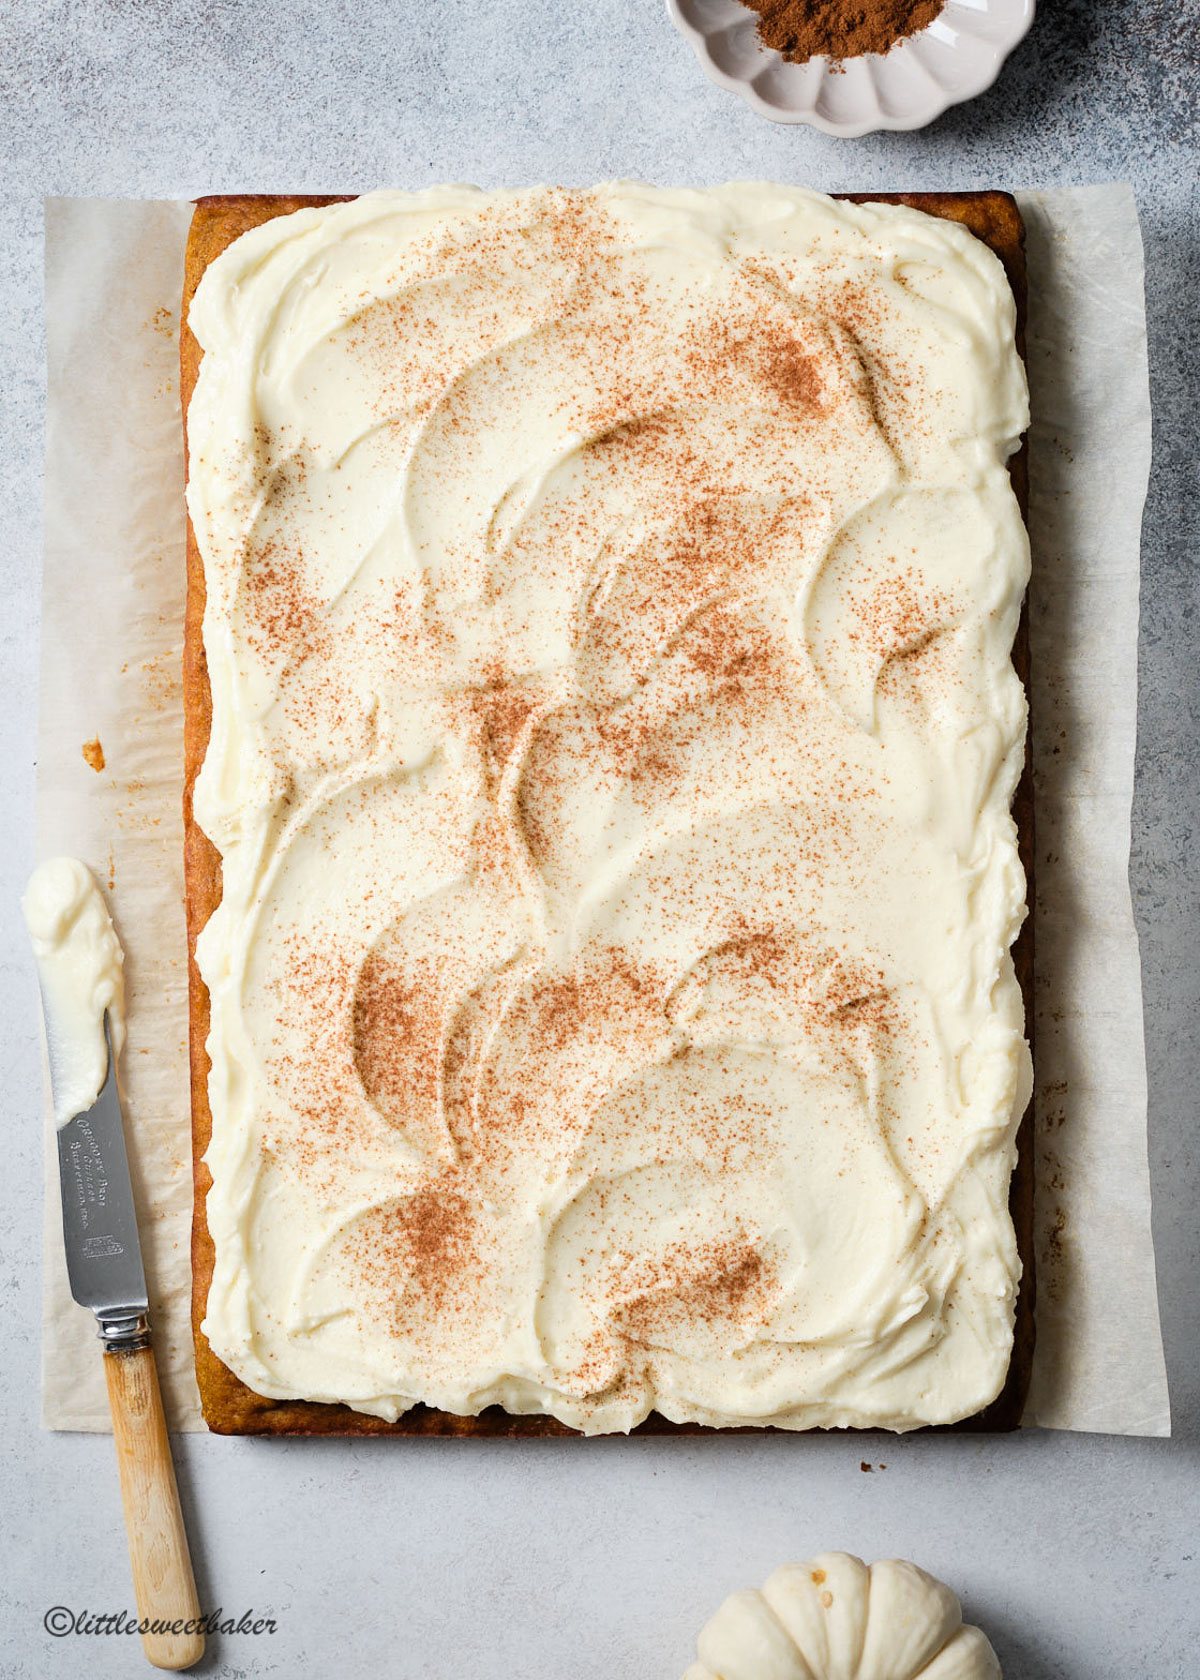 A whole pumpkin bar uncut with swirls of cream cheese frosting dusted with cinnamon.